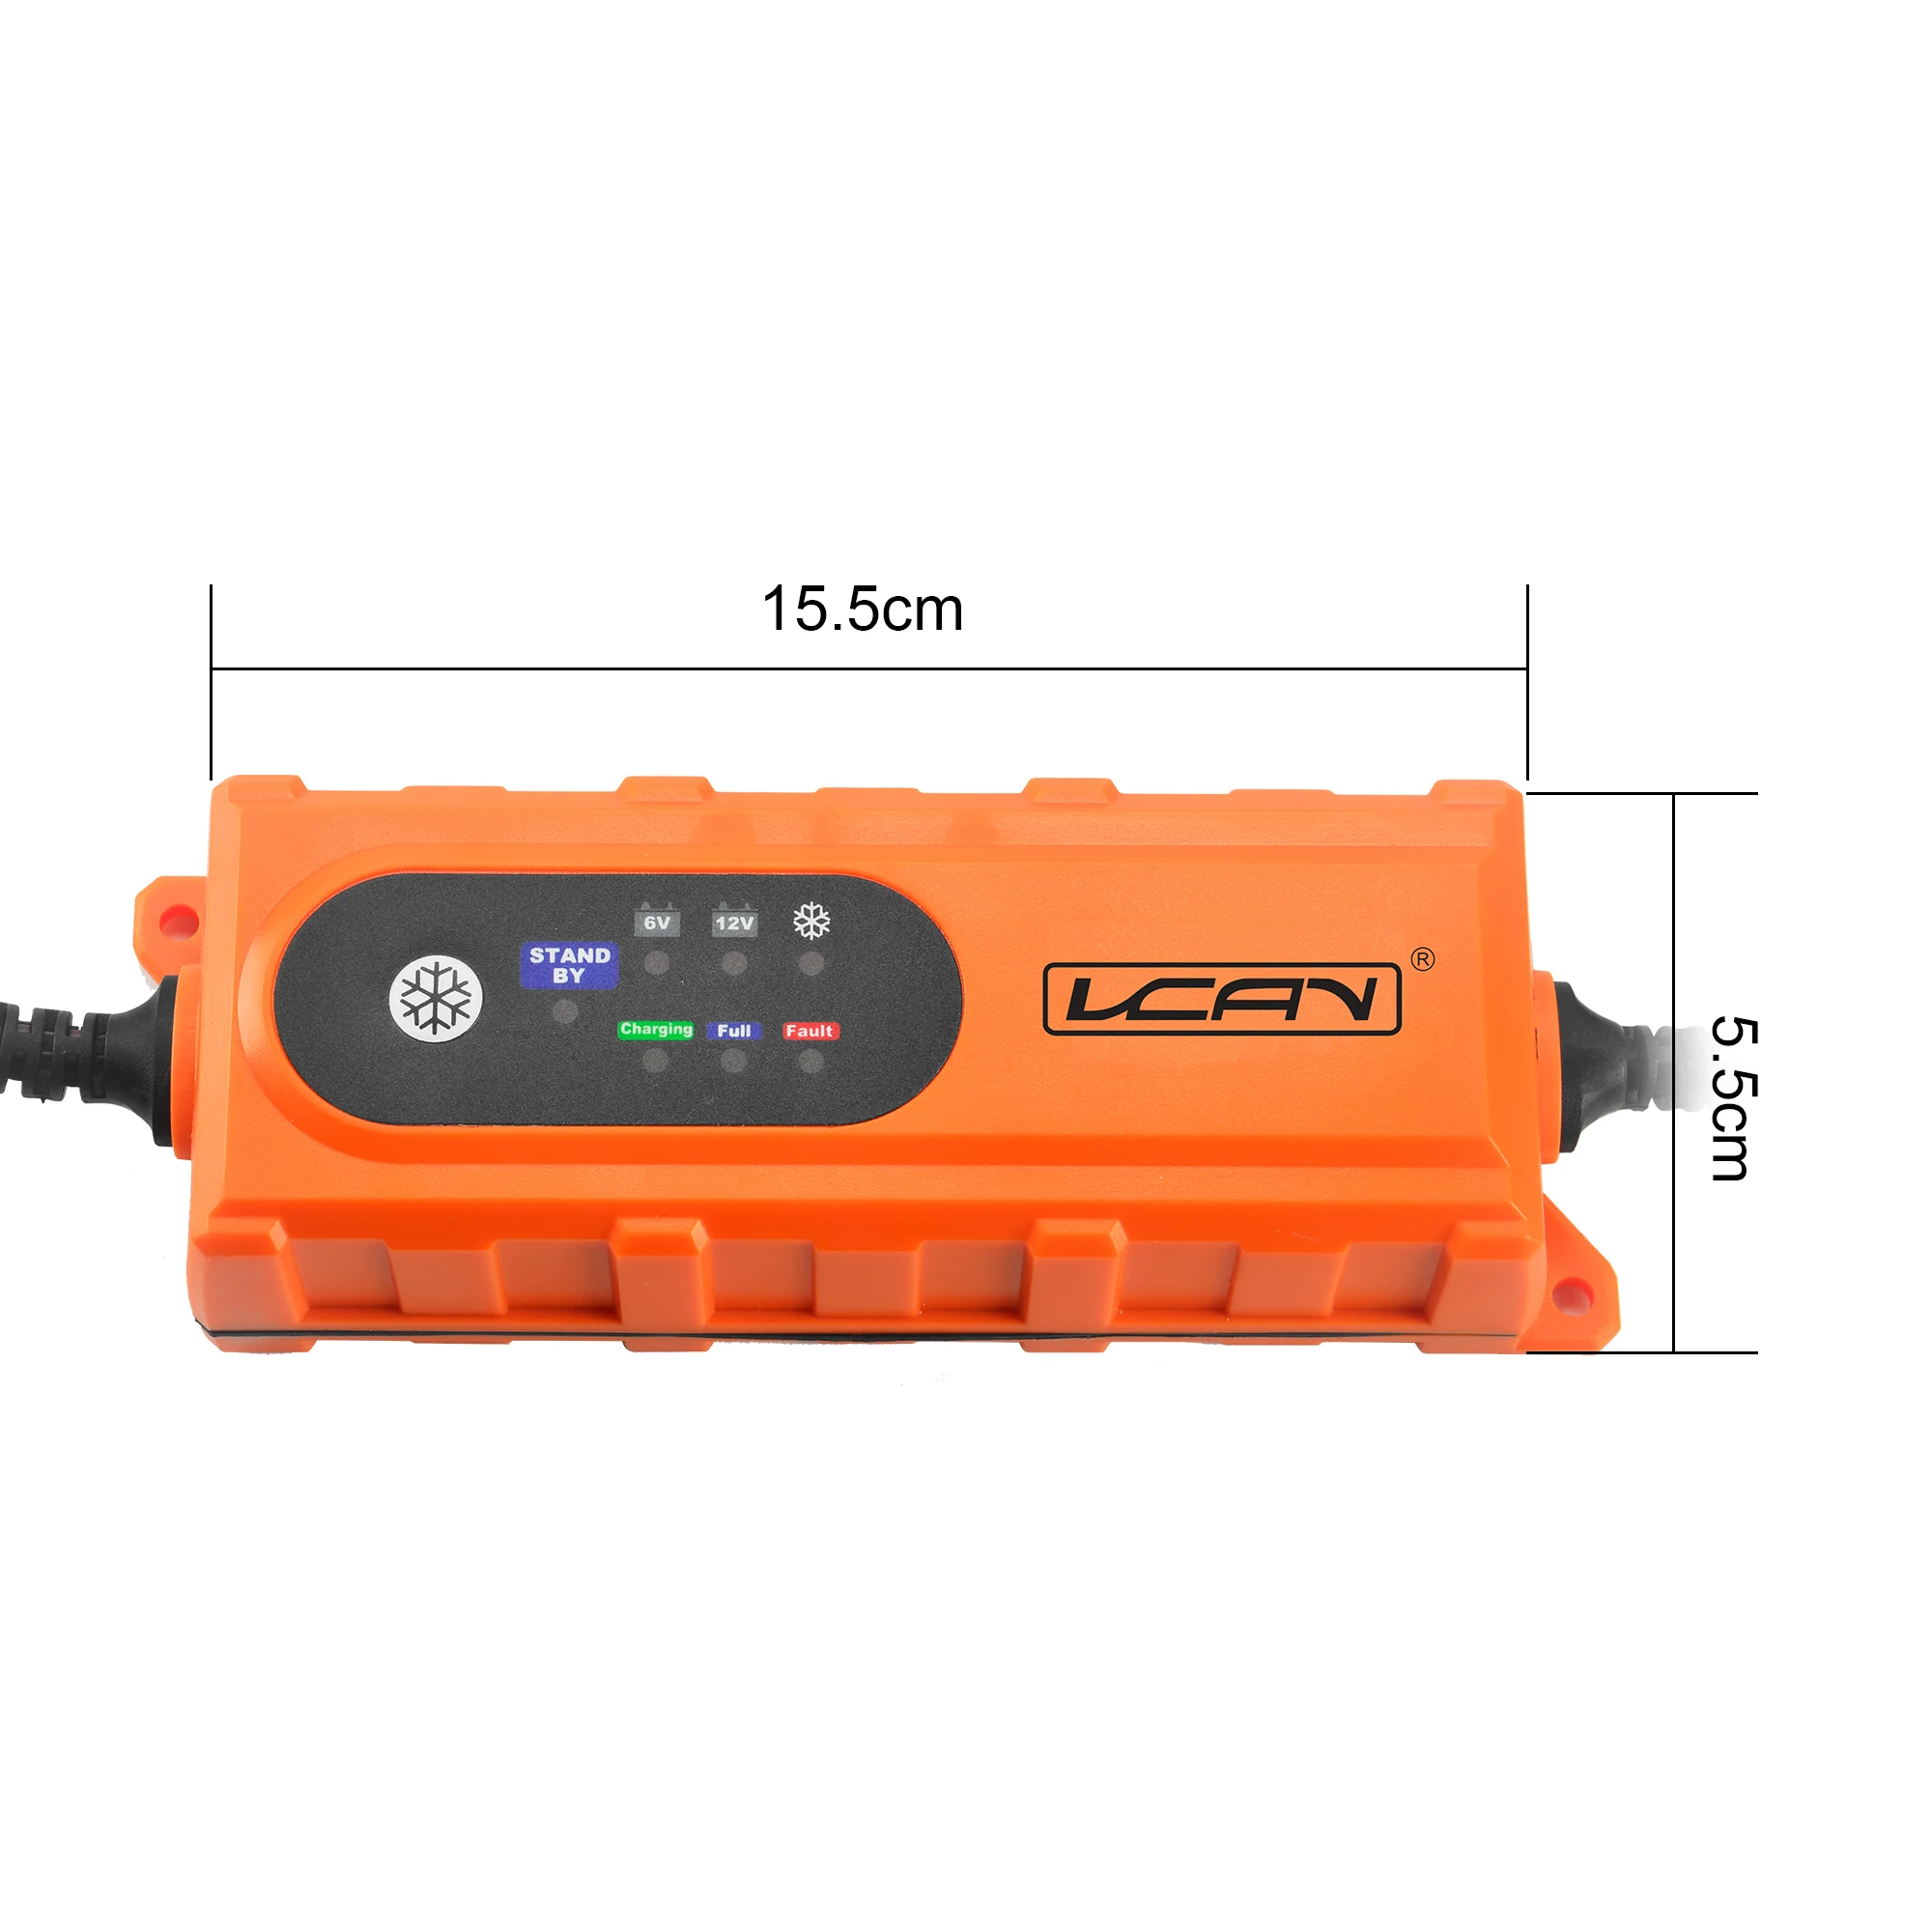 Tender 12 Volt Junior Automatic Zhejiang Battery Charger Auto Cable Trickle  Charger For Car Battery 12v Solar Hf Battery Charger - Buy 12 Volt Battery  Charger,12 Volt Battery Charger,12 Volt Battery Charger